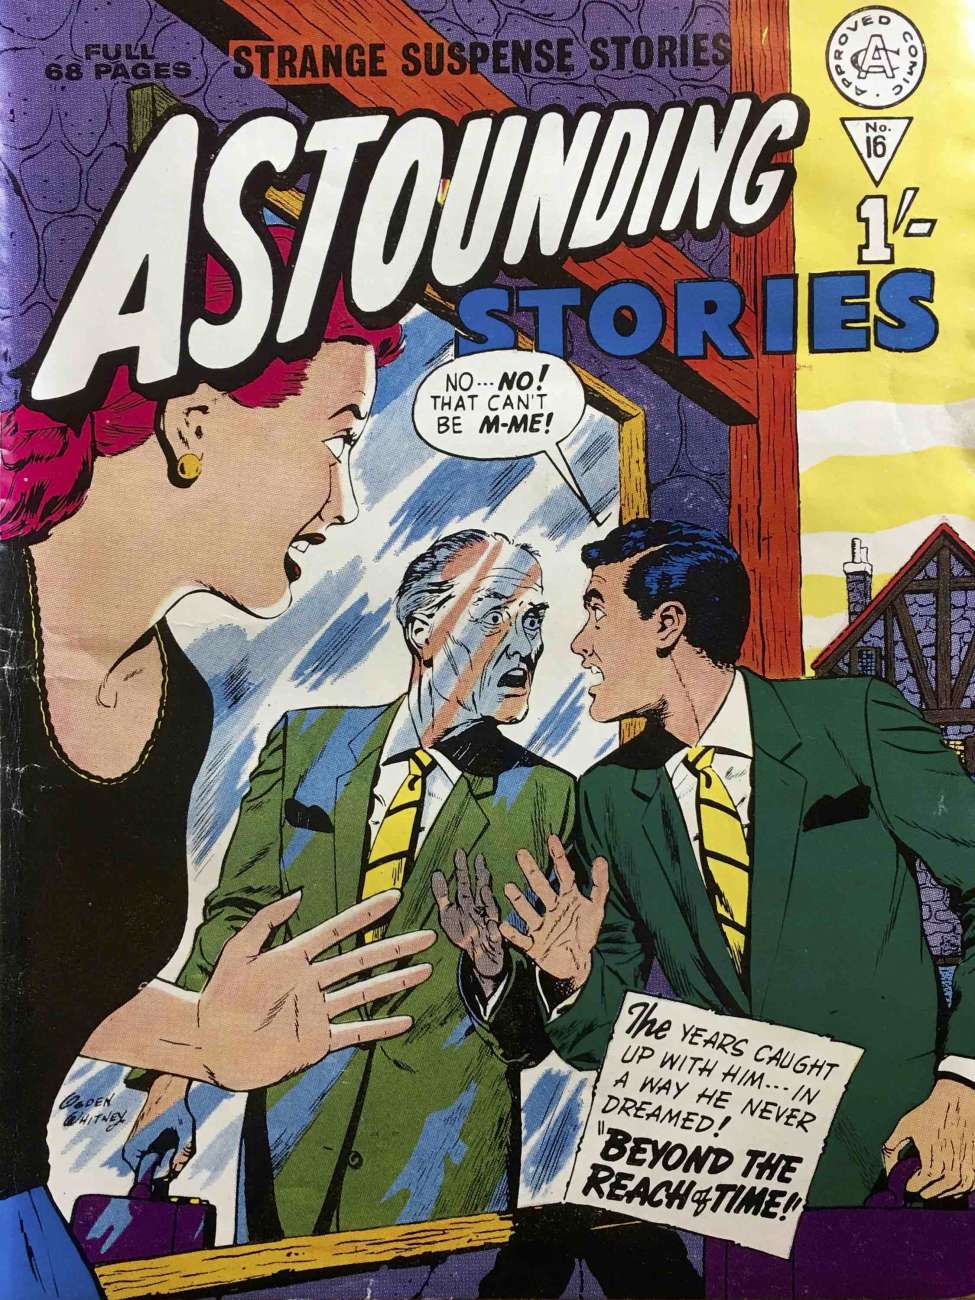 Book Cover For Astounding Stories 16